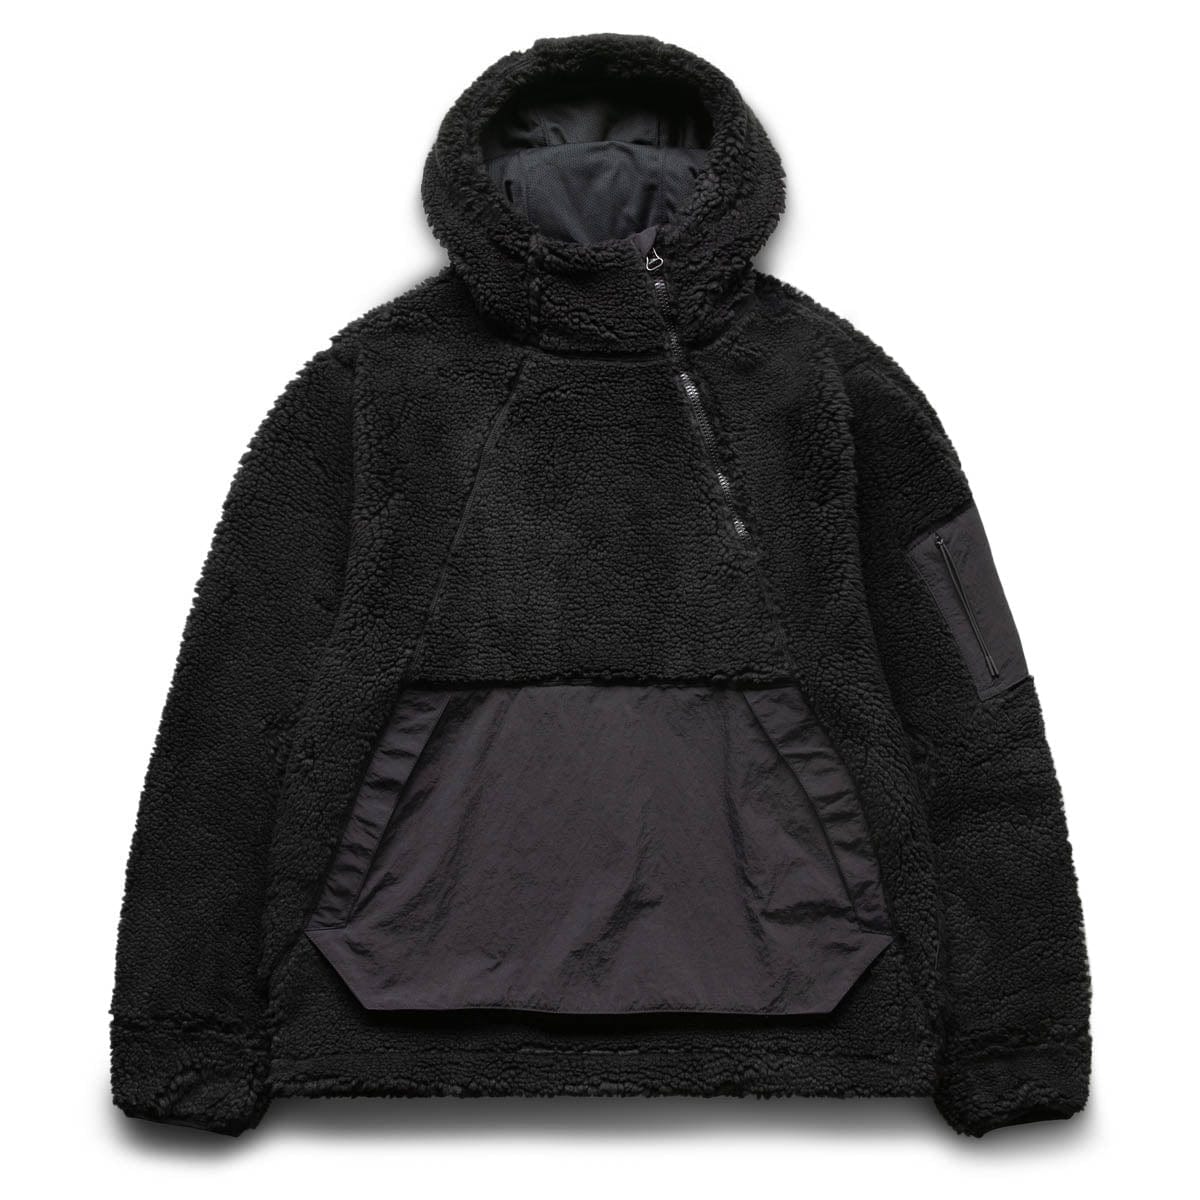 ASYM HOODED PULLOVER